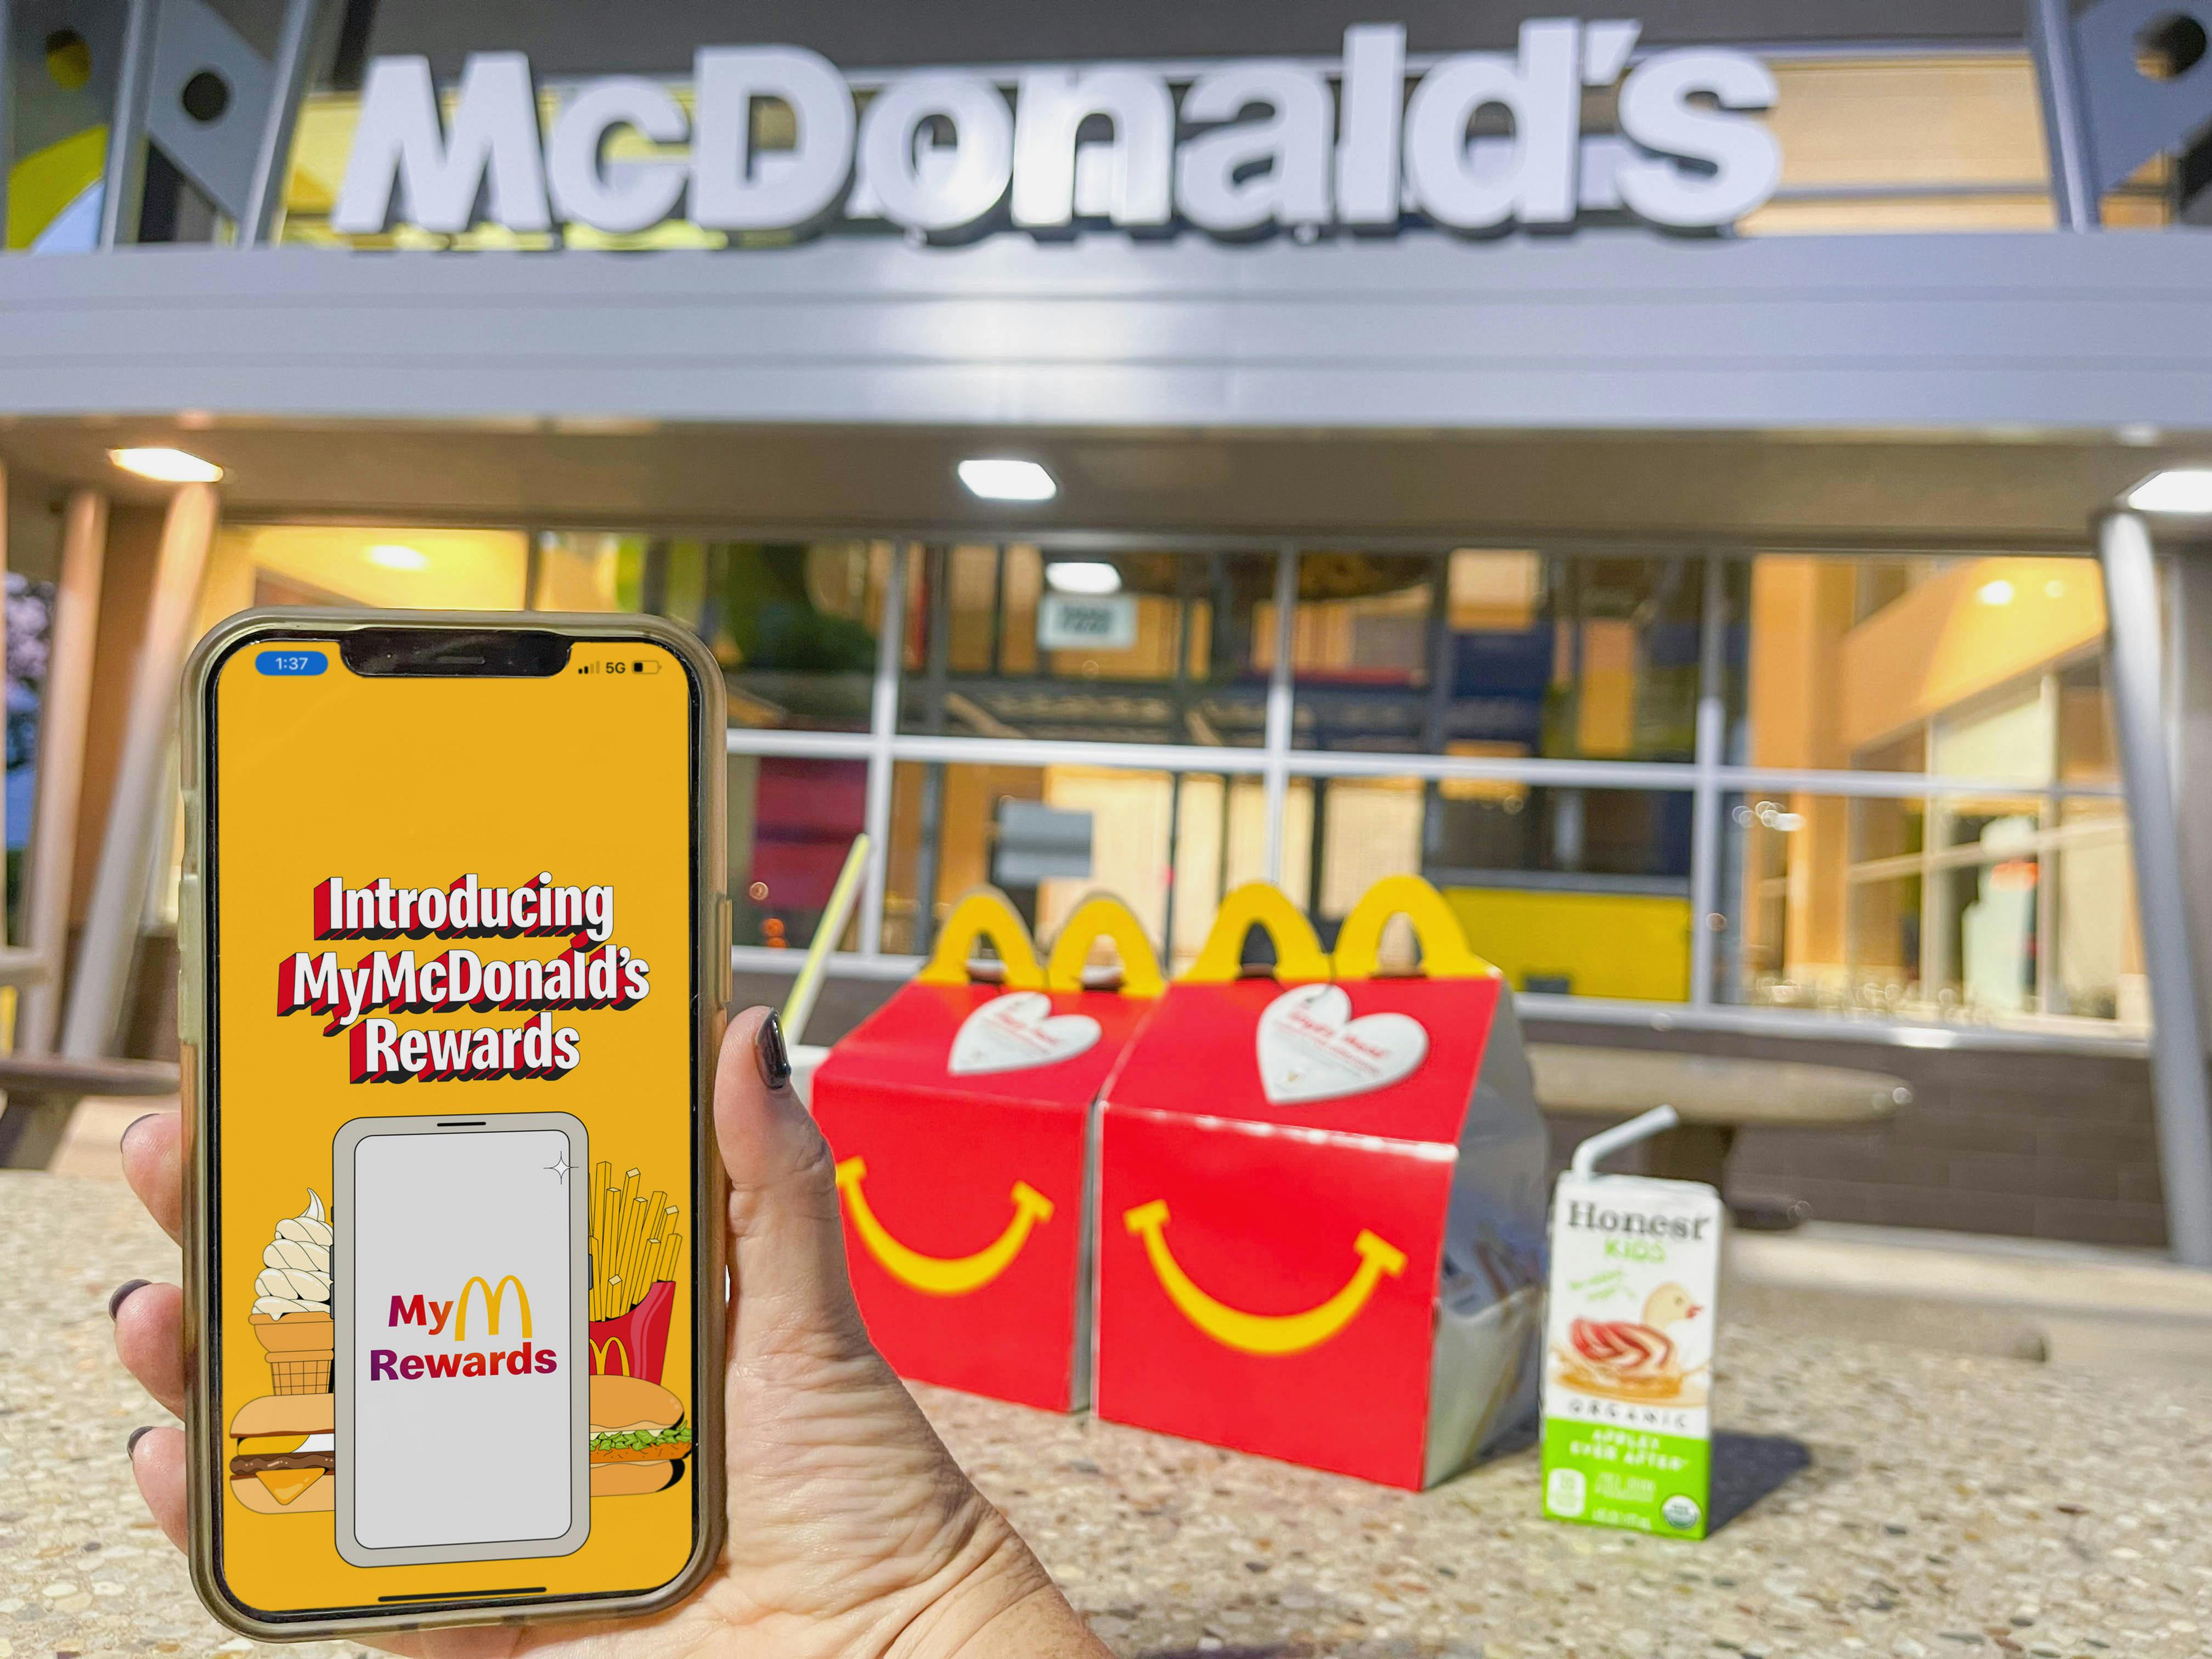 A person's hand holding up a cellphone displaying the McDonald's Rewards app in front of two Happy Meals and a juice box sitting on a table outside of a McDonald's restaurant.